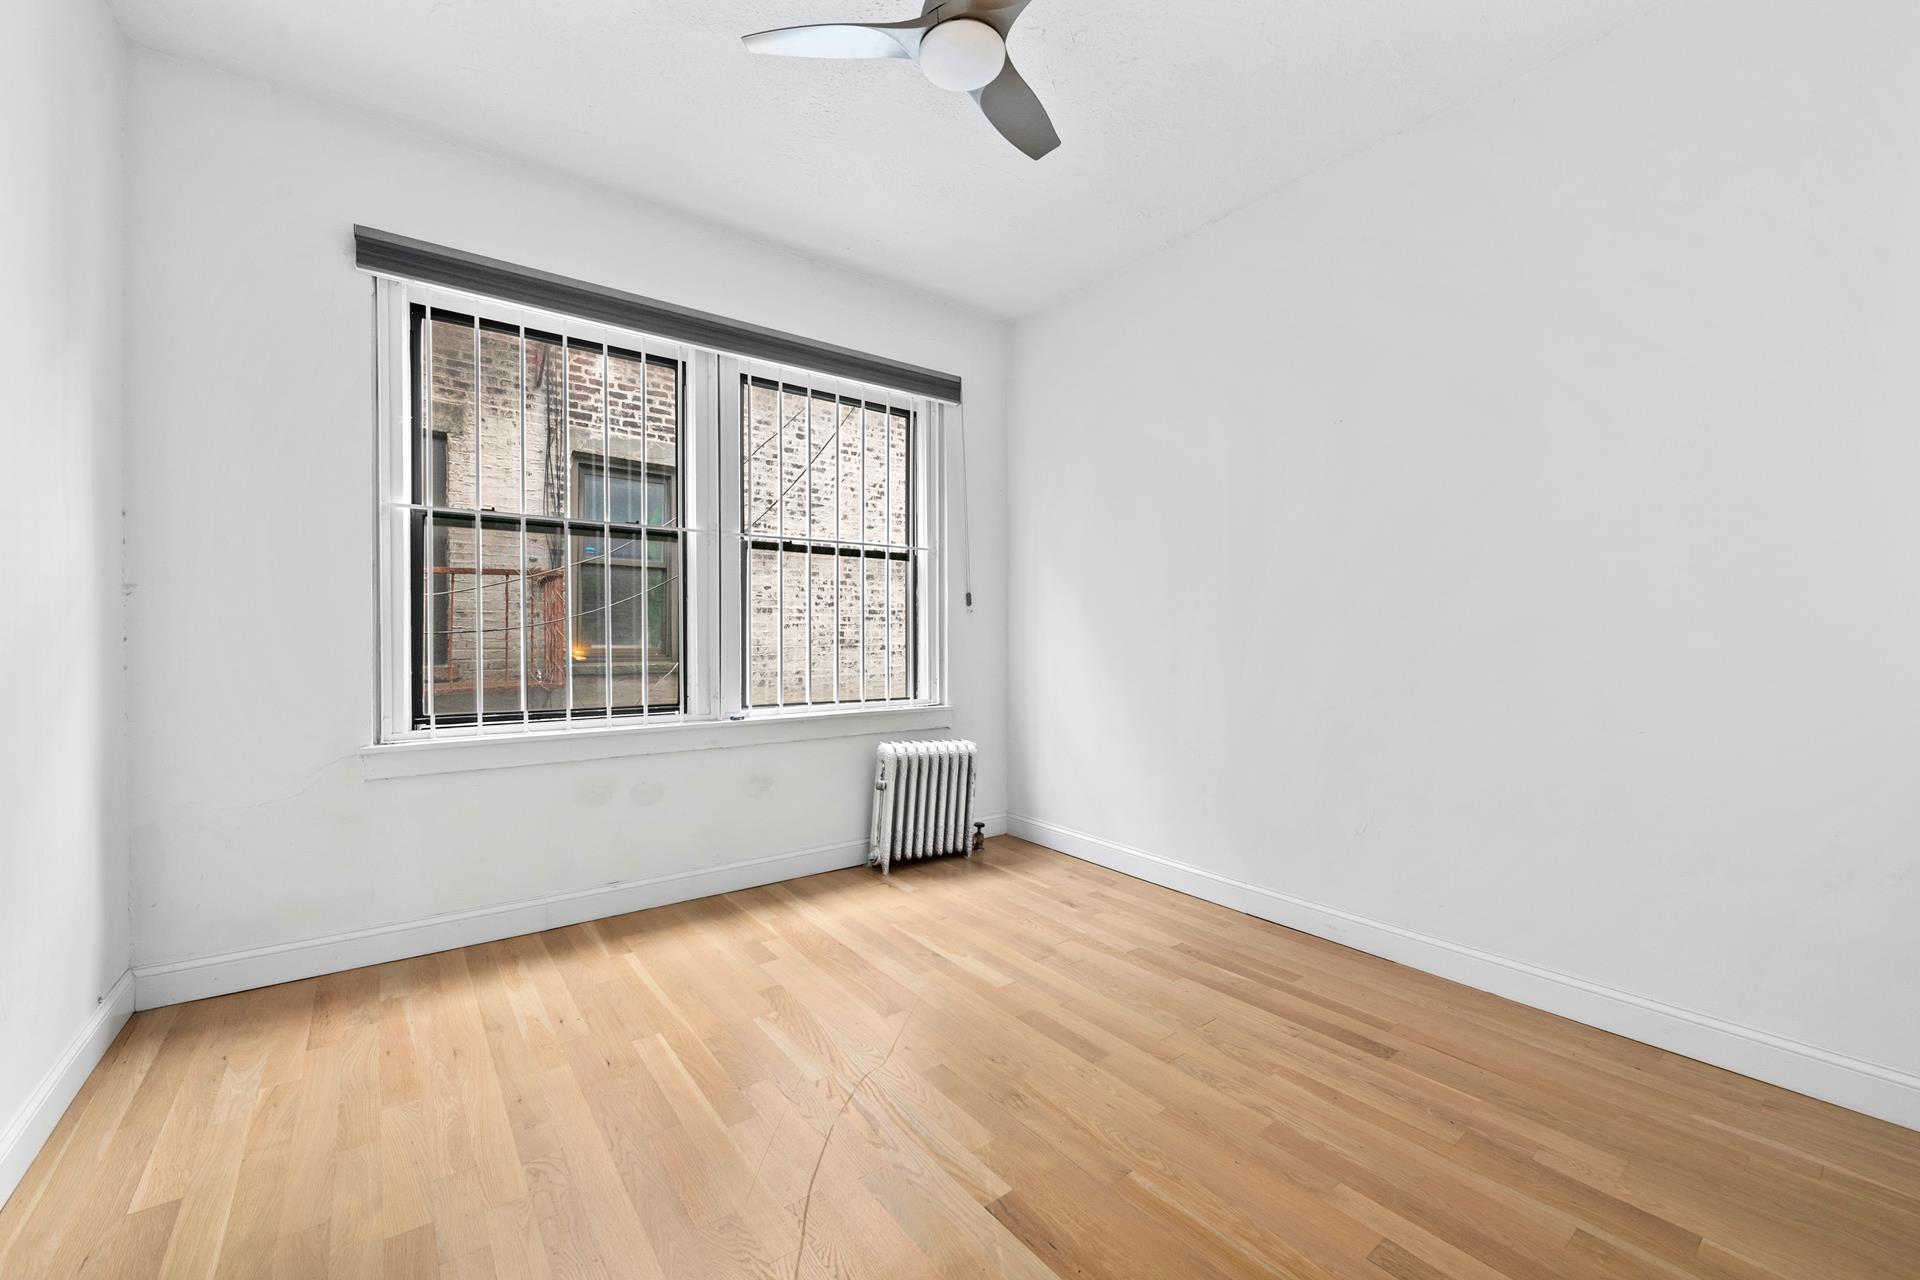 159 Rivington Street, Lower East Side, Downtown, NYC - 9 Bedrooms  
5.5 Bathrooms  
15 Rooms - 